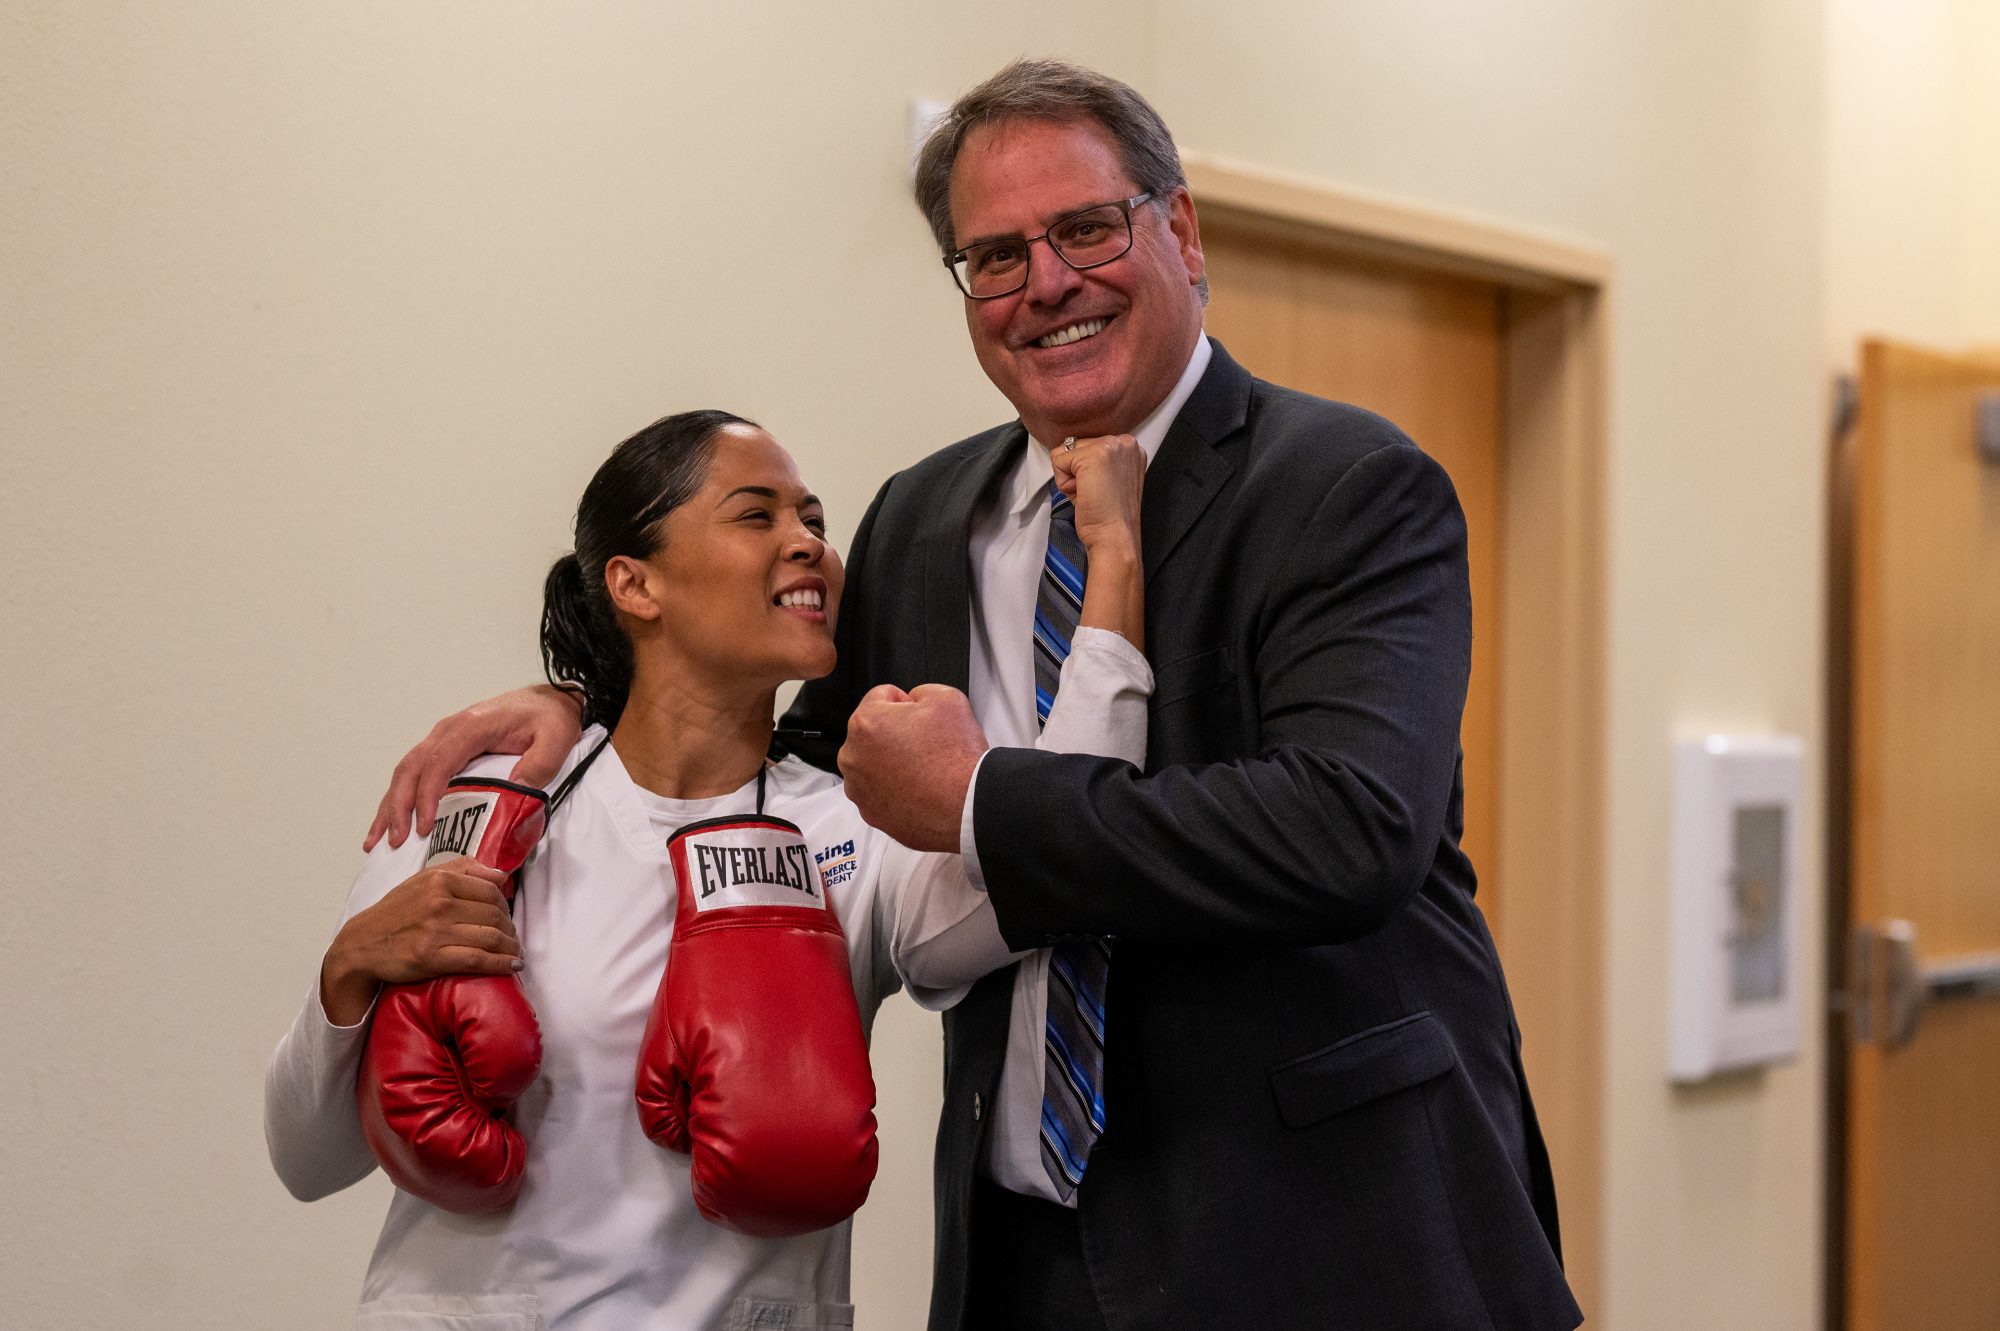 A woman with boxing gloves hanging from her shoulders poses with a man as both jokingly feign chin punches to each other.